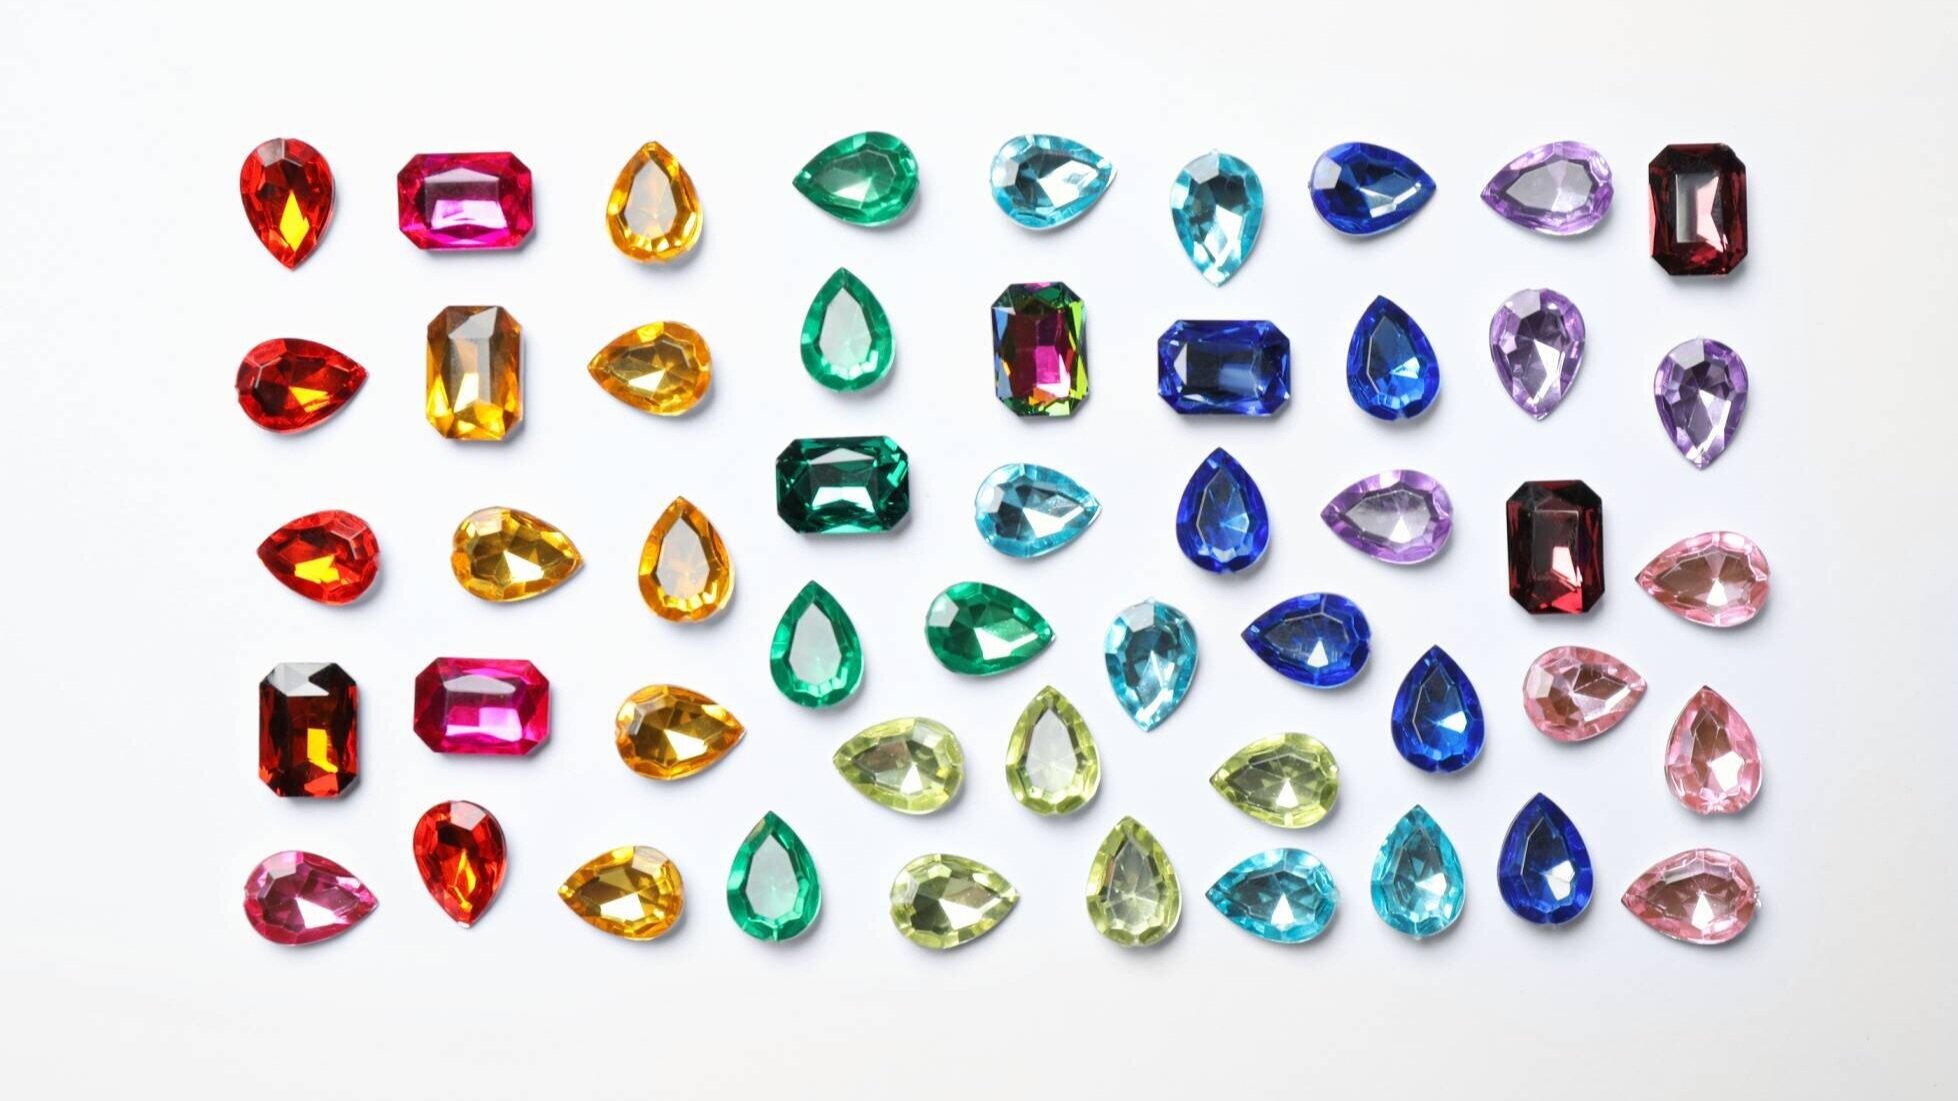 Different birthstones in various colors like red blue green and pink